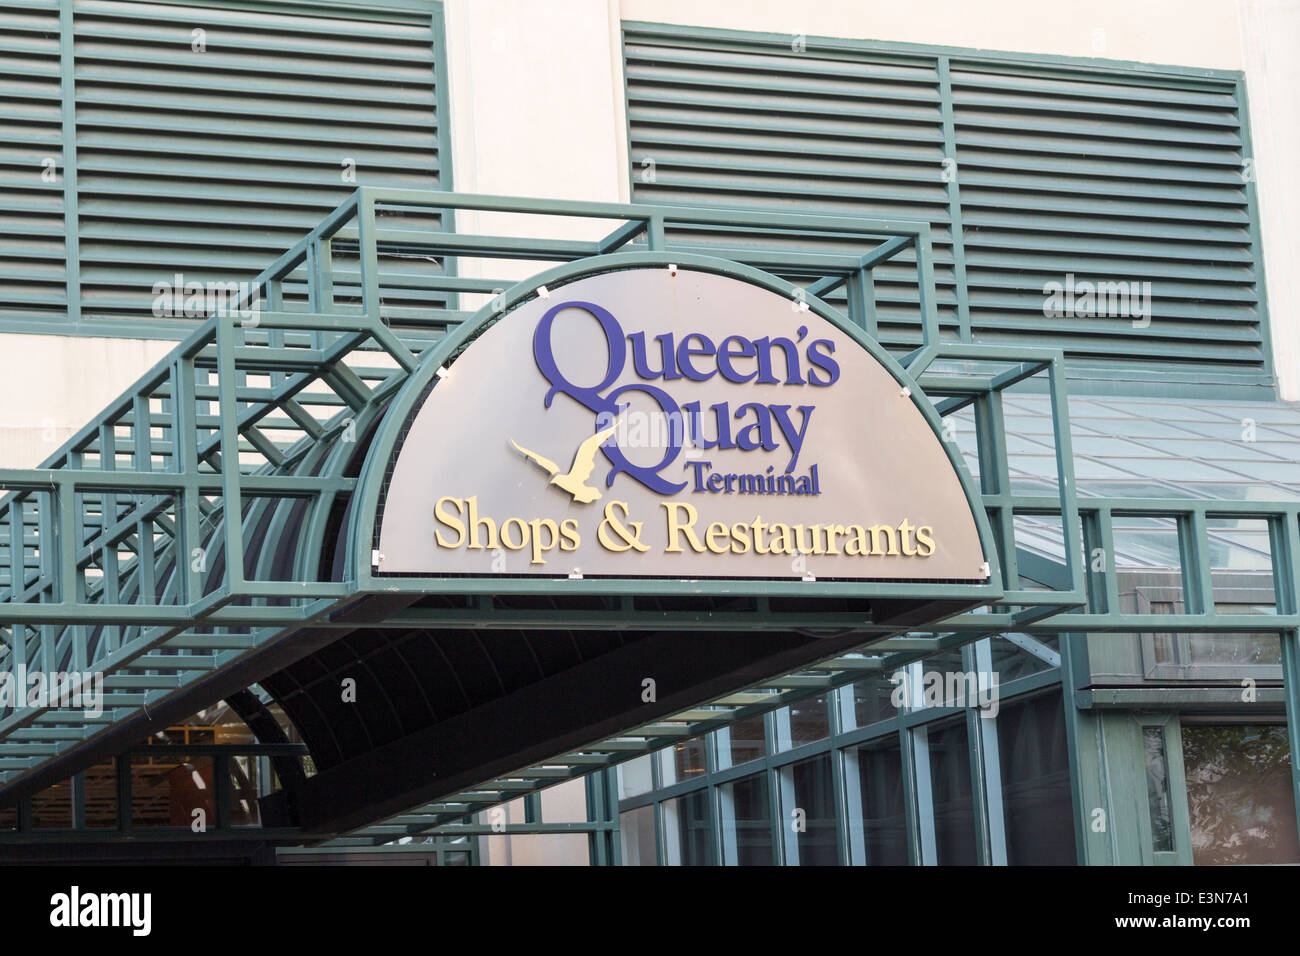 Sign for Queens Quay Shops and Restaurants on the waerfront in Toronto Harbour Stock Photo